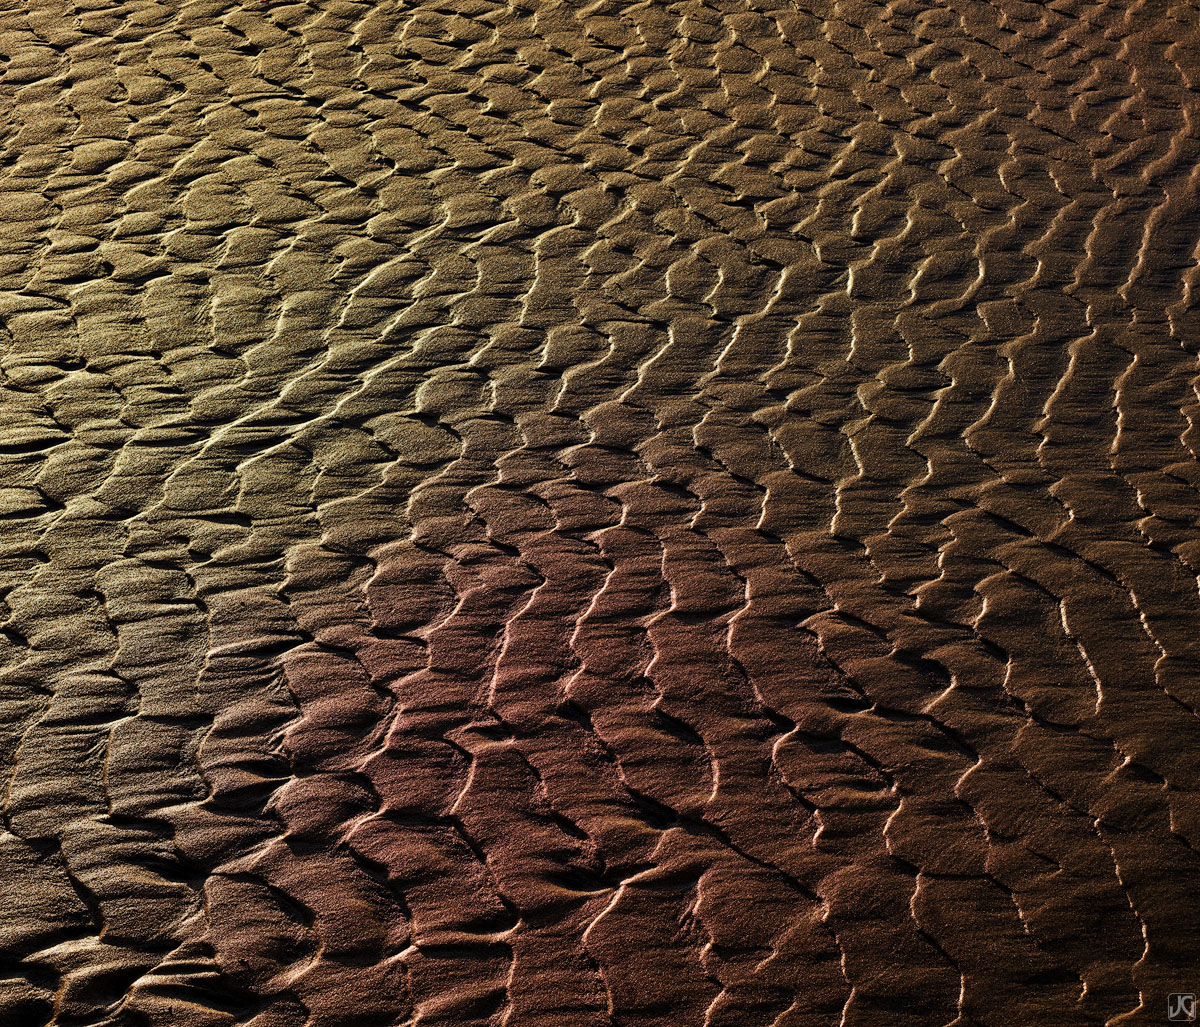 Sunset glows across these patterns in the sand at low tide. I love heading to the beach and finding undisturbed creations before...